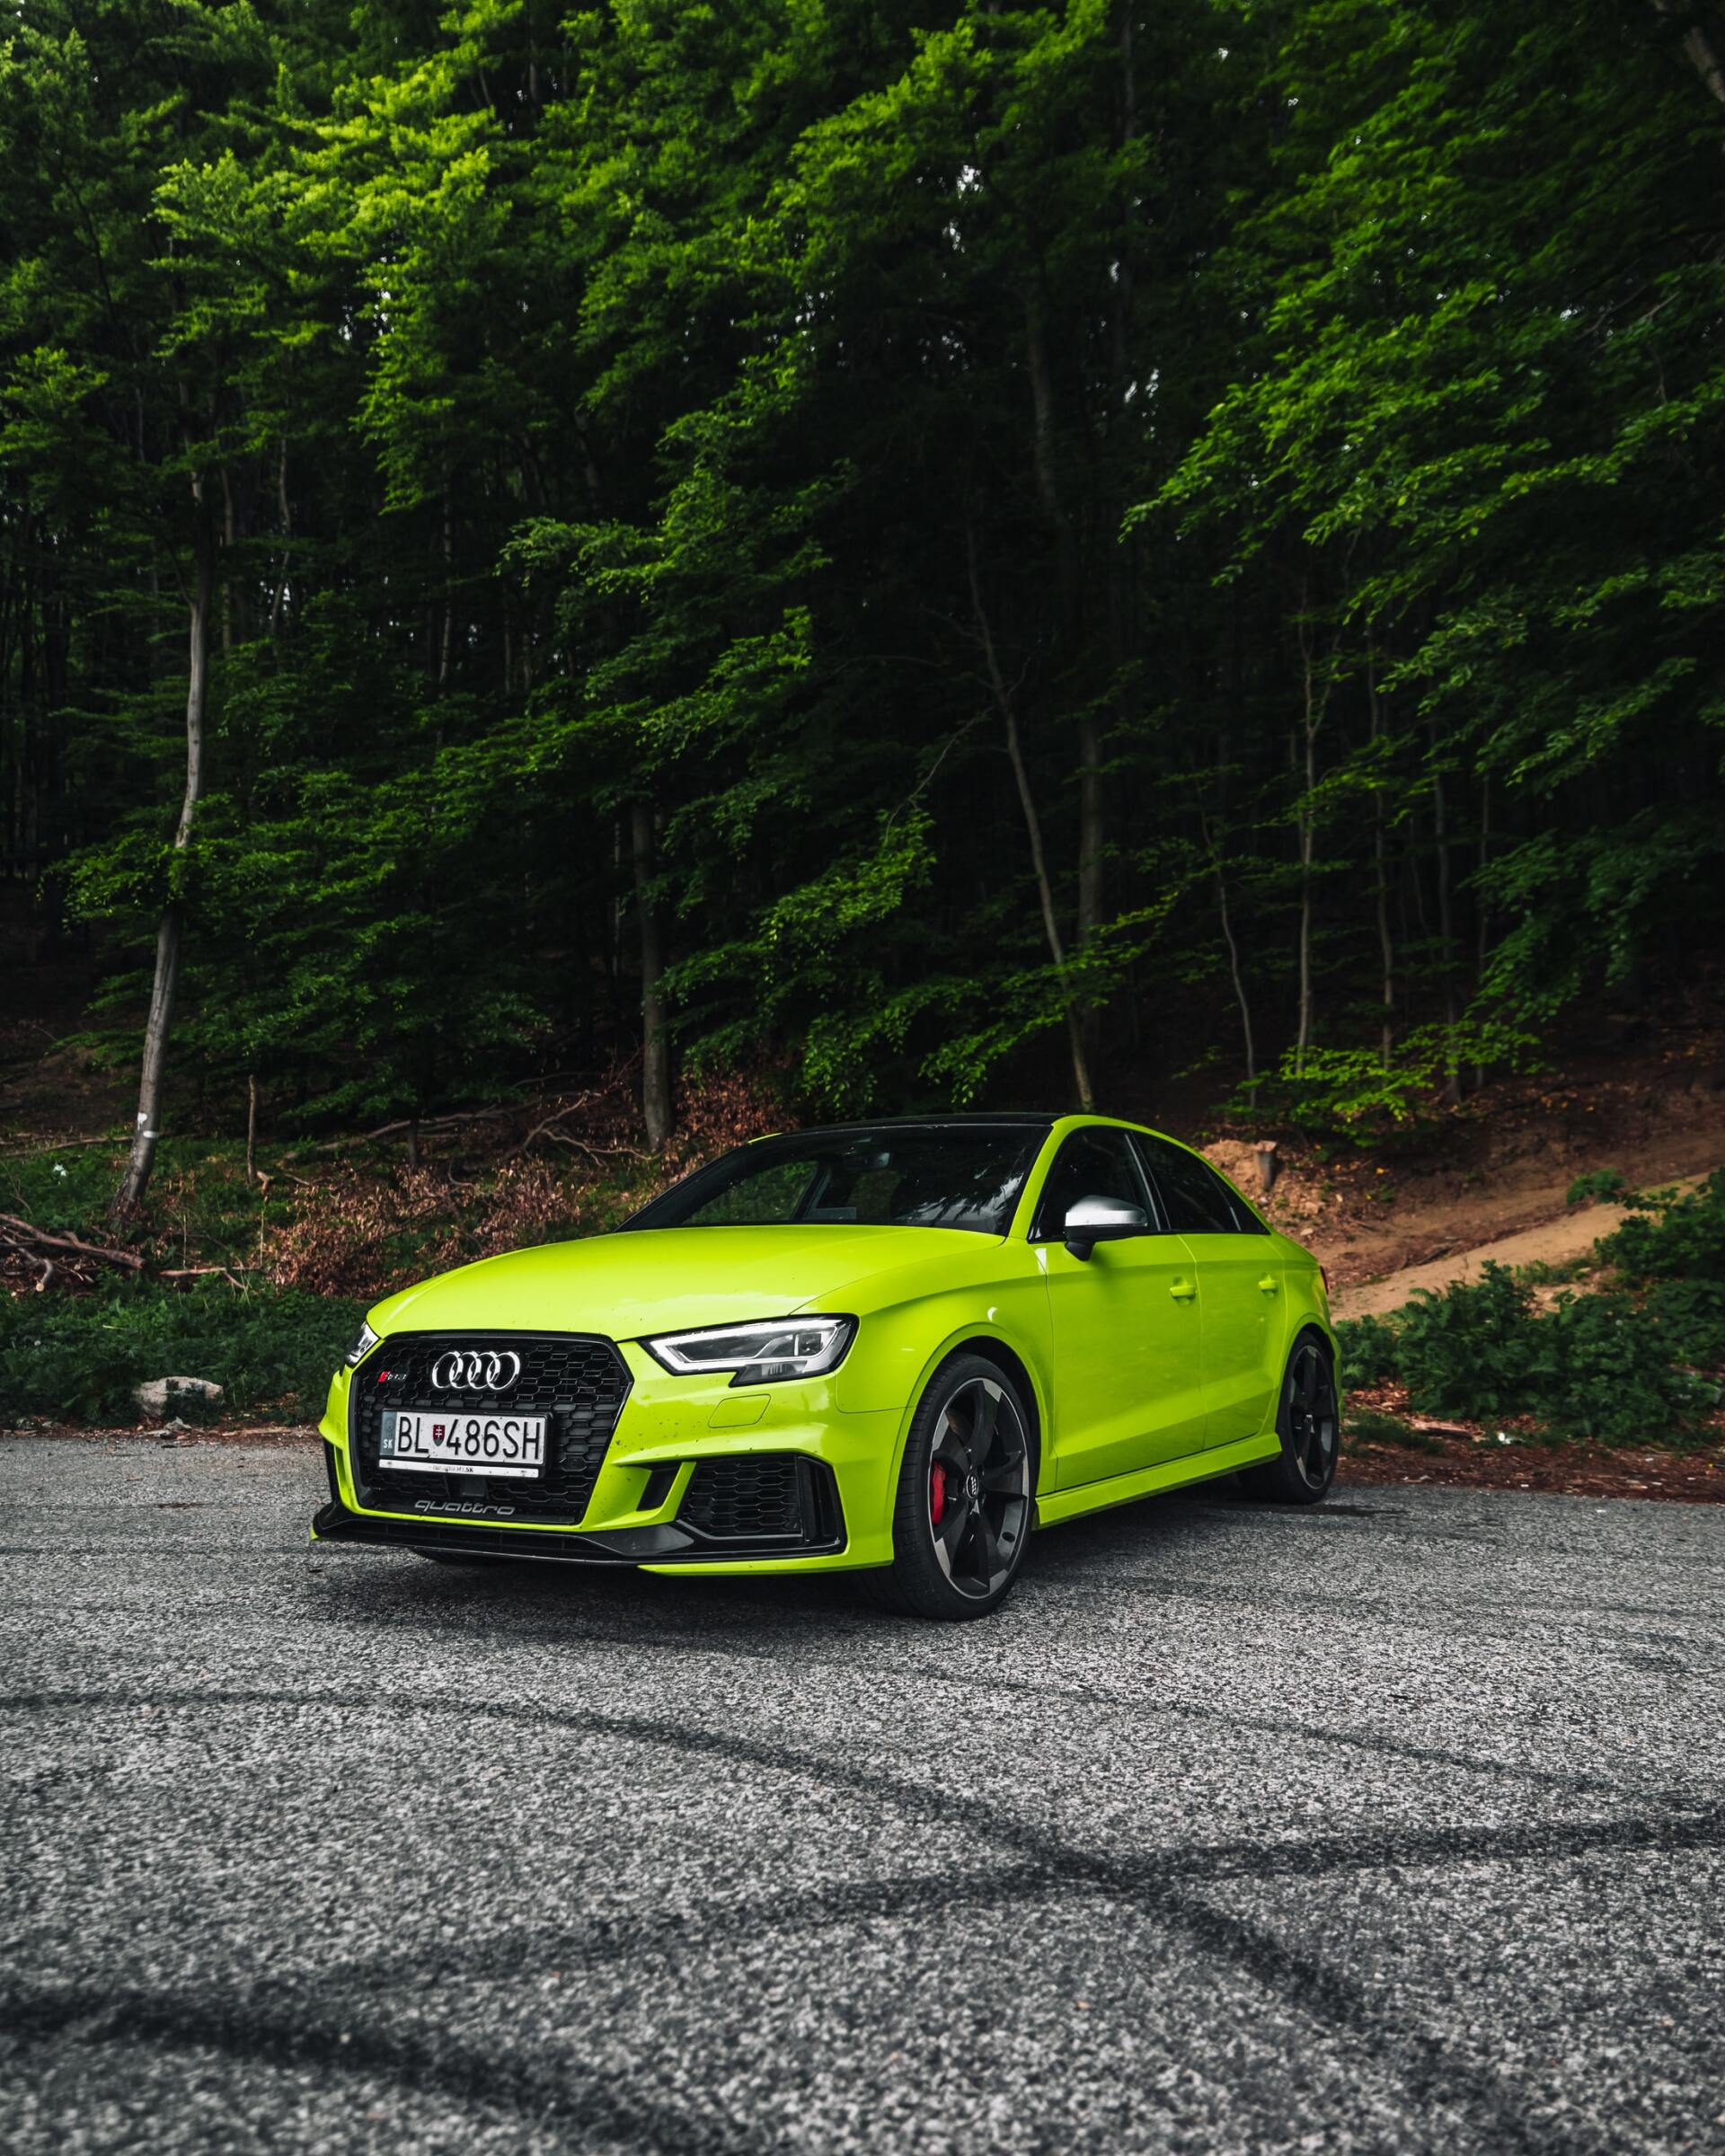 chartreuse green Audi RS 4